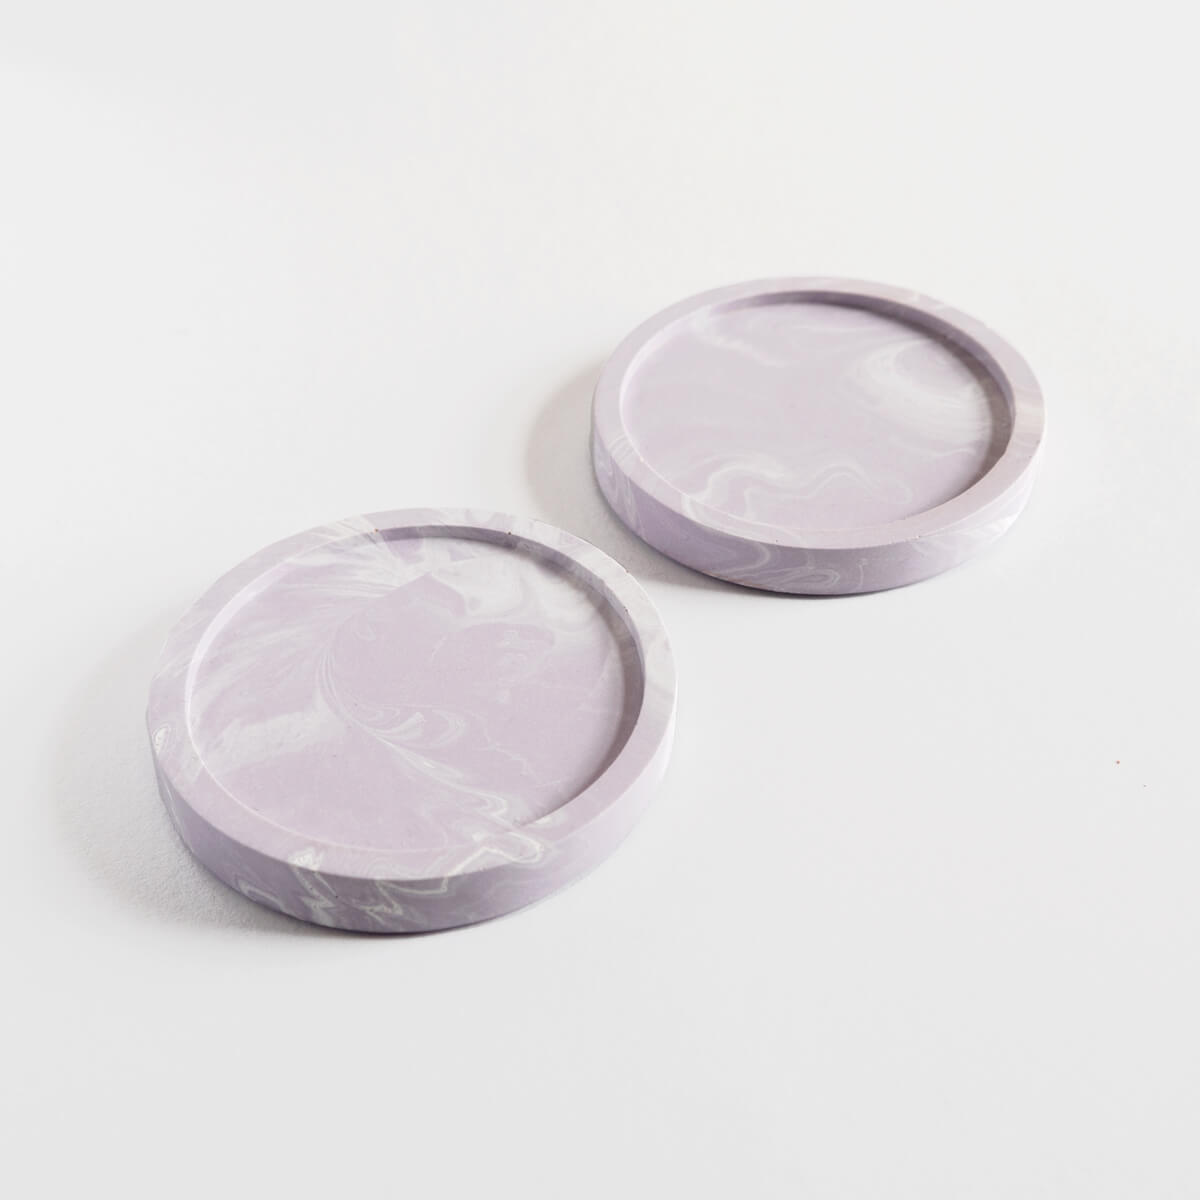 A pair of marbled lilac round coasters handmade by Klndra for Curious Makers